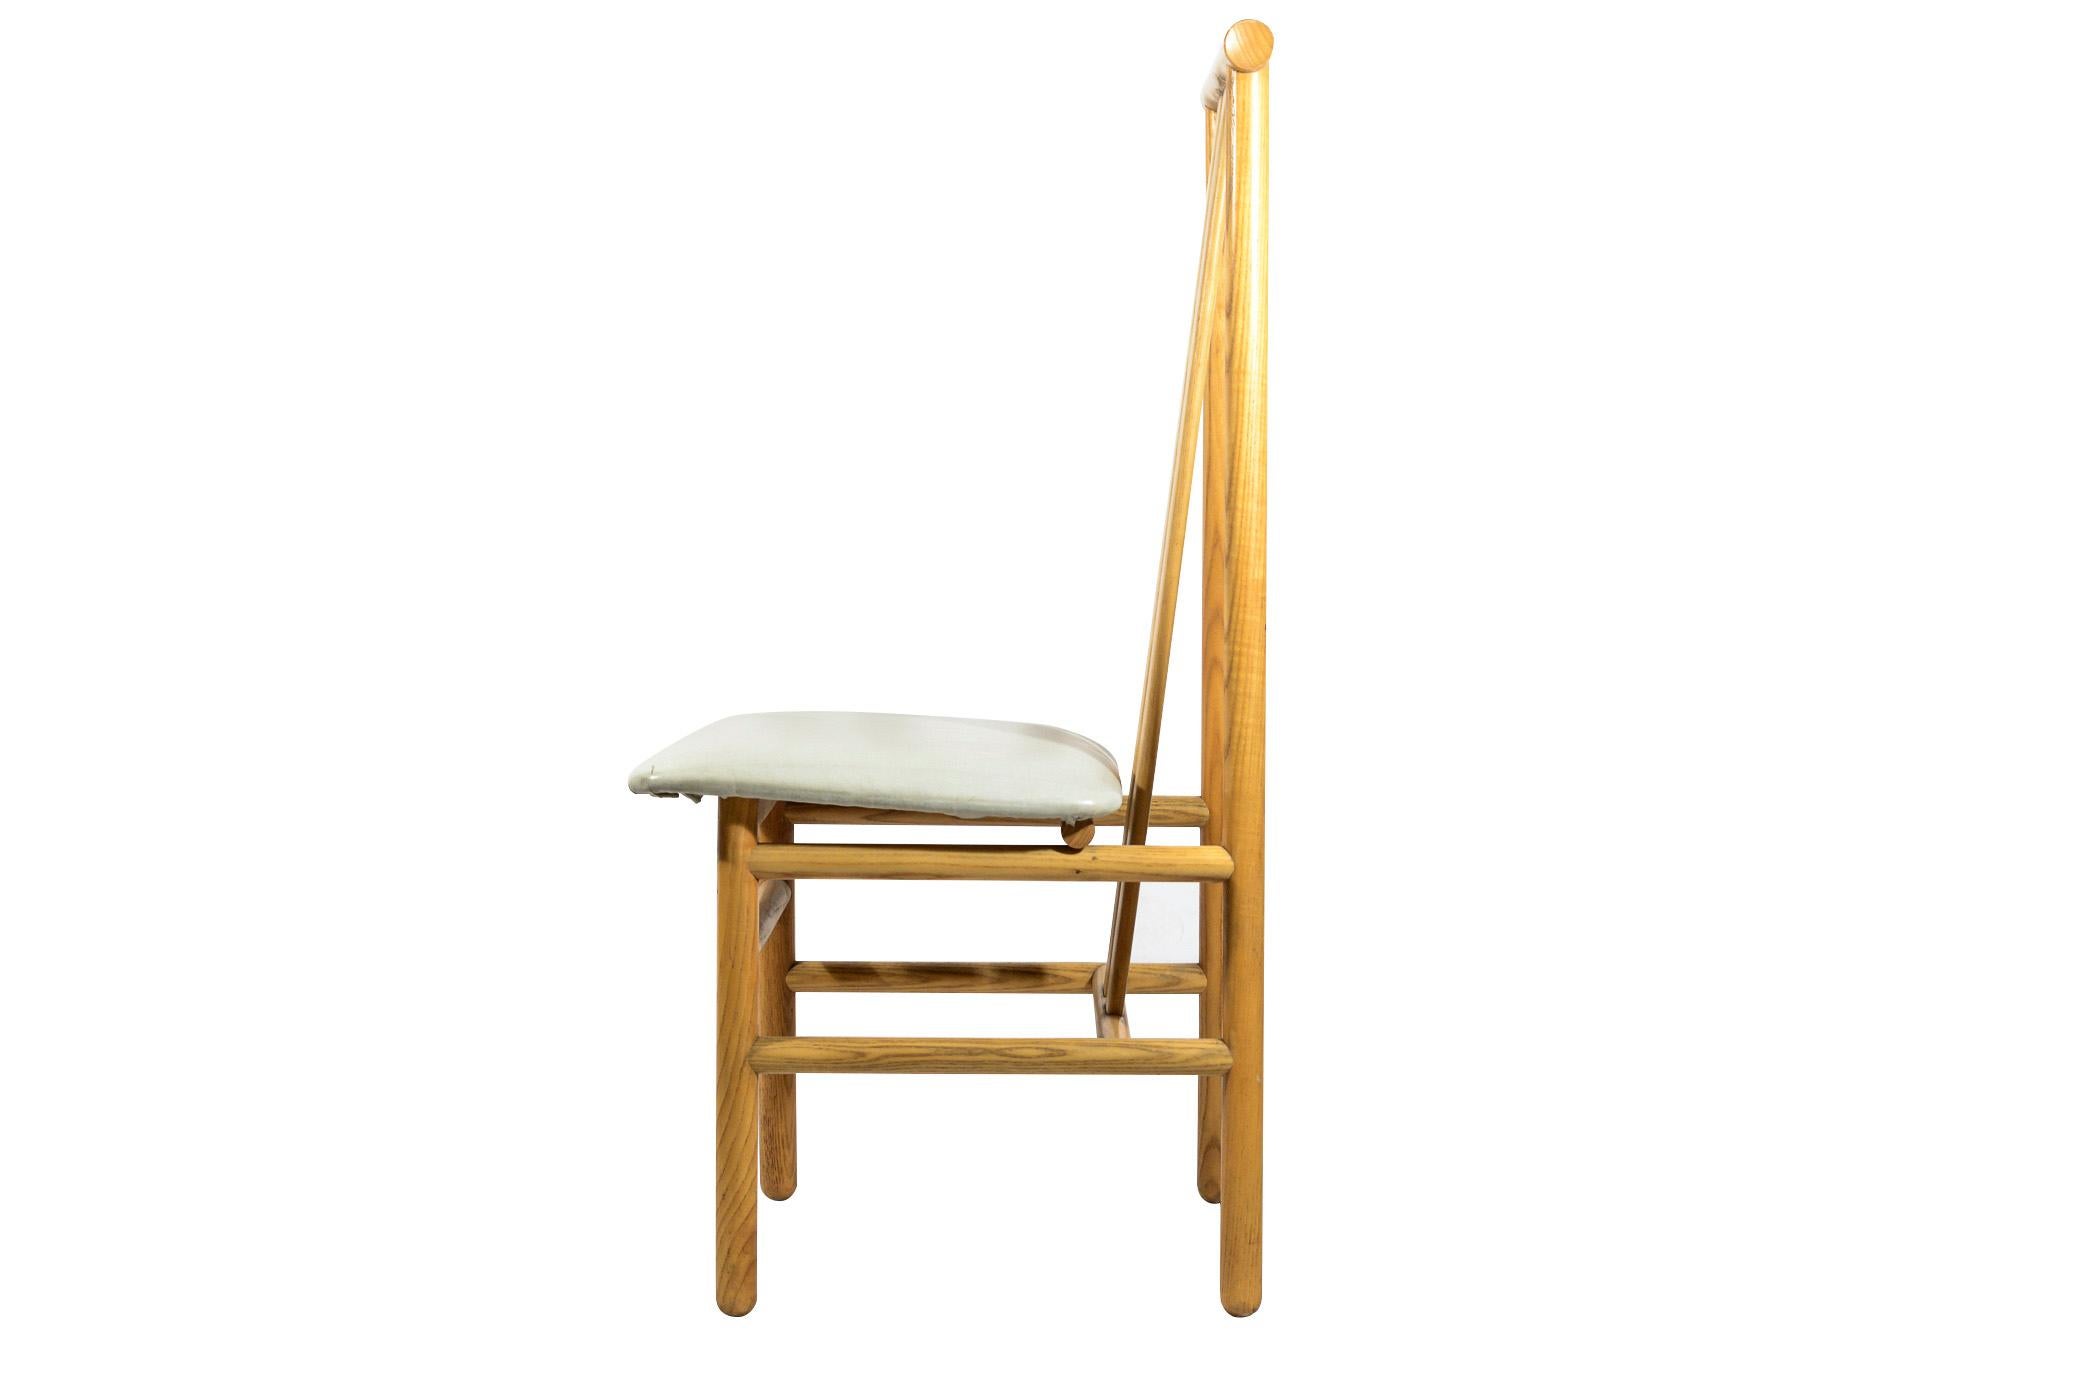 Annig Sarian,
Set of eight chairs, model Zea, 
Wood,
Italy, circa 1980.

Measures: Height 103 cm, width 41 cm, depth 52 cm, seat height 45 cm.